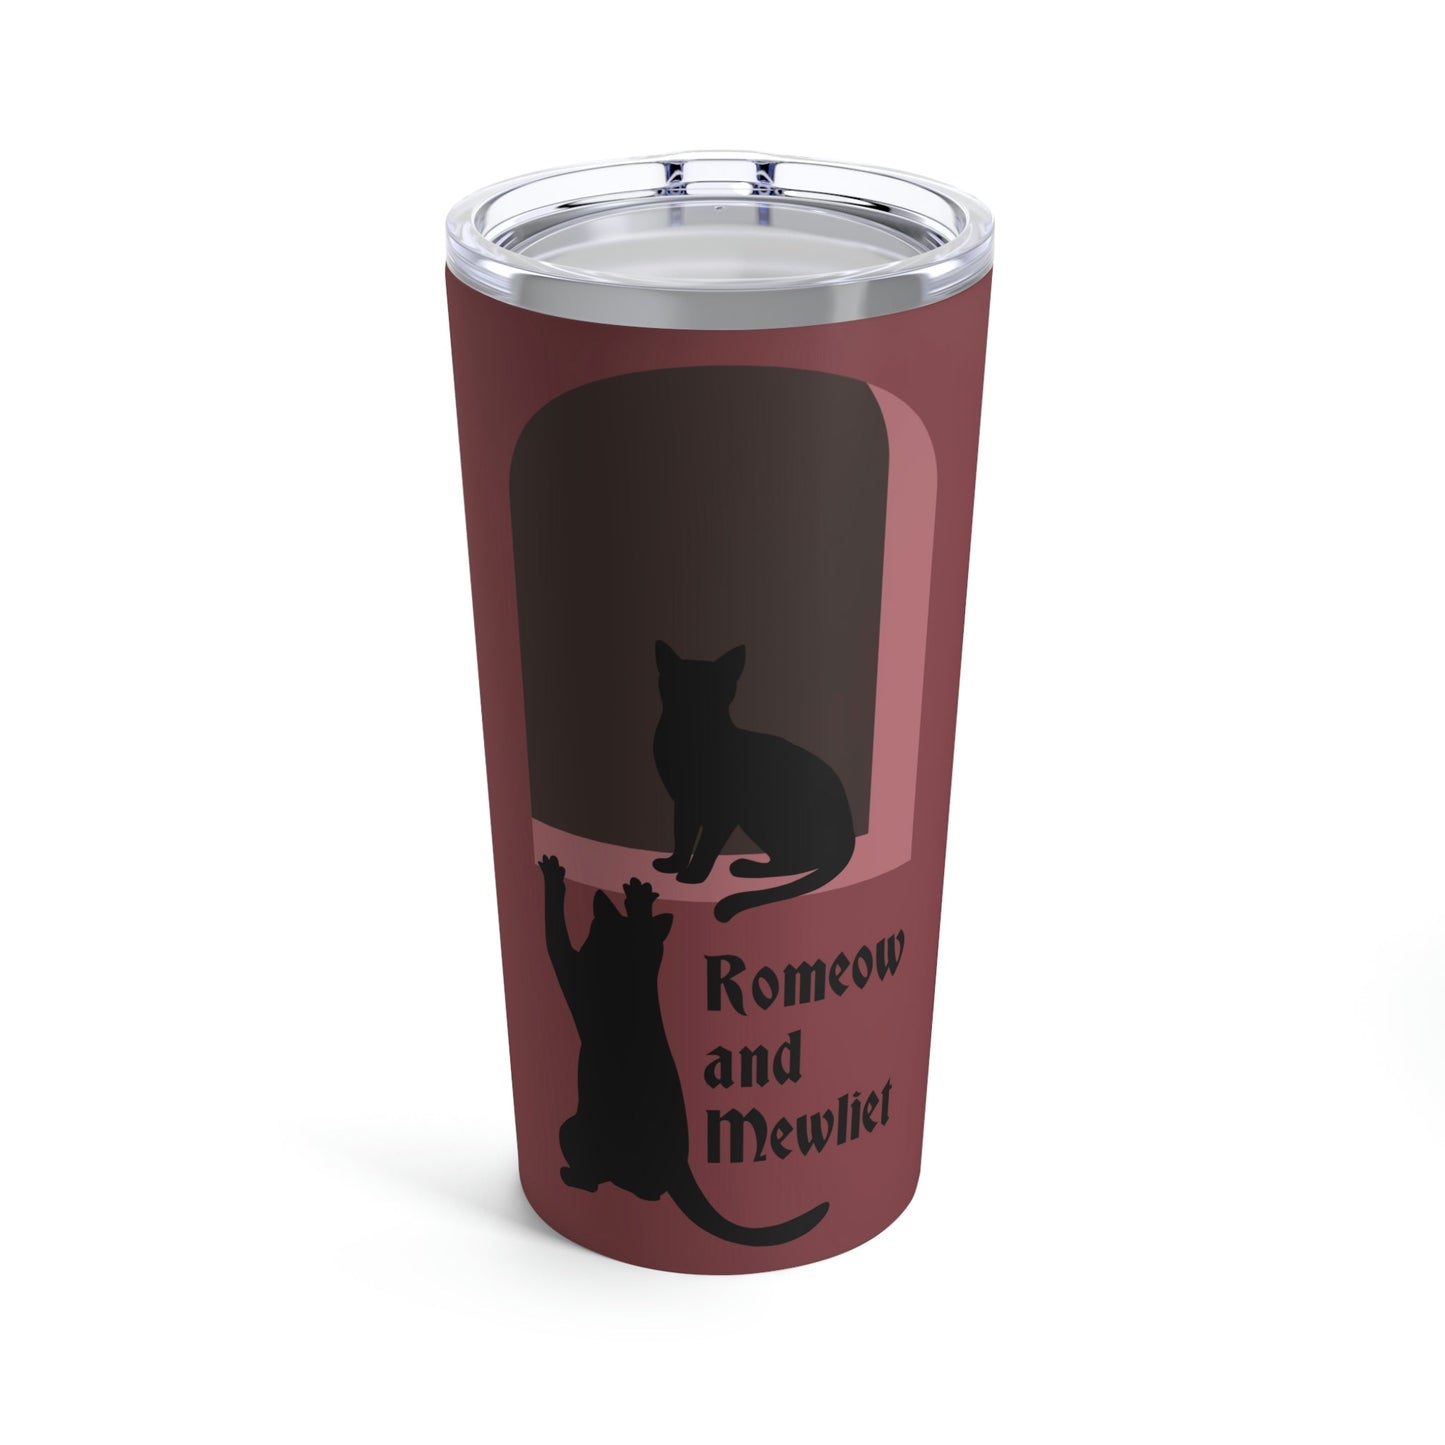 Romeow and Mewliet. William Shakespeare Romeo And Juliet Black Cat Burgundy Stainless Steel Hot or Cold Vacuum Tumbler 20oz Ichaku [Perfect Gifts Selection]